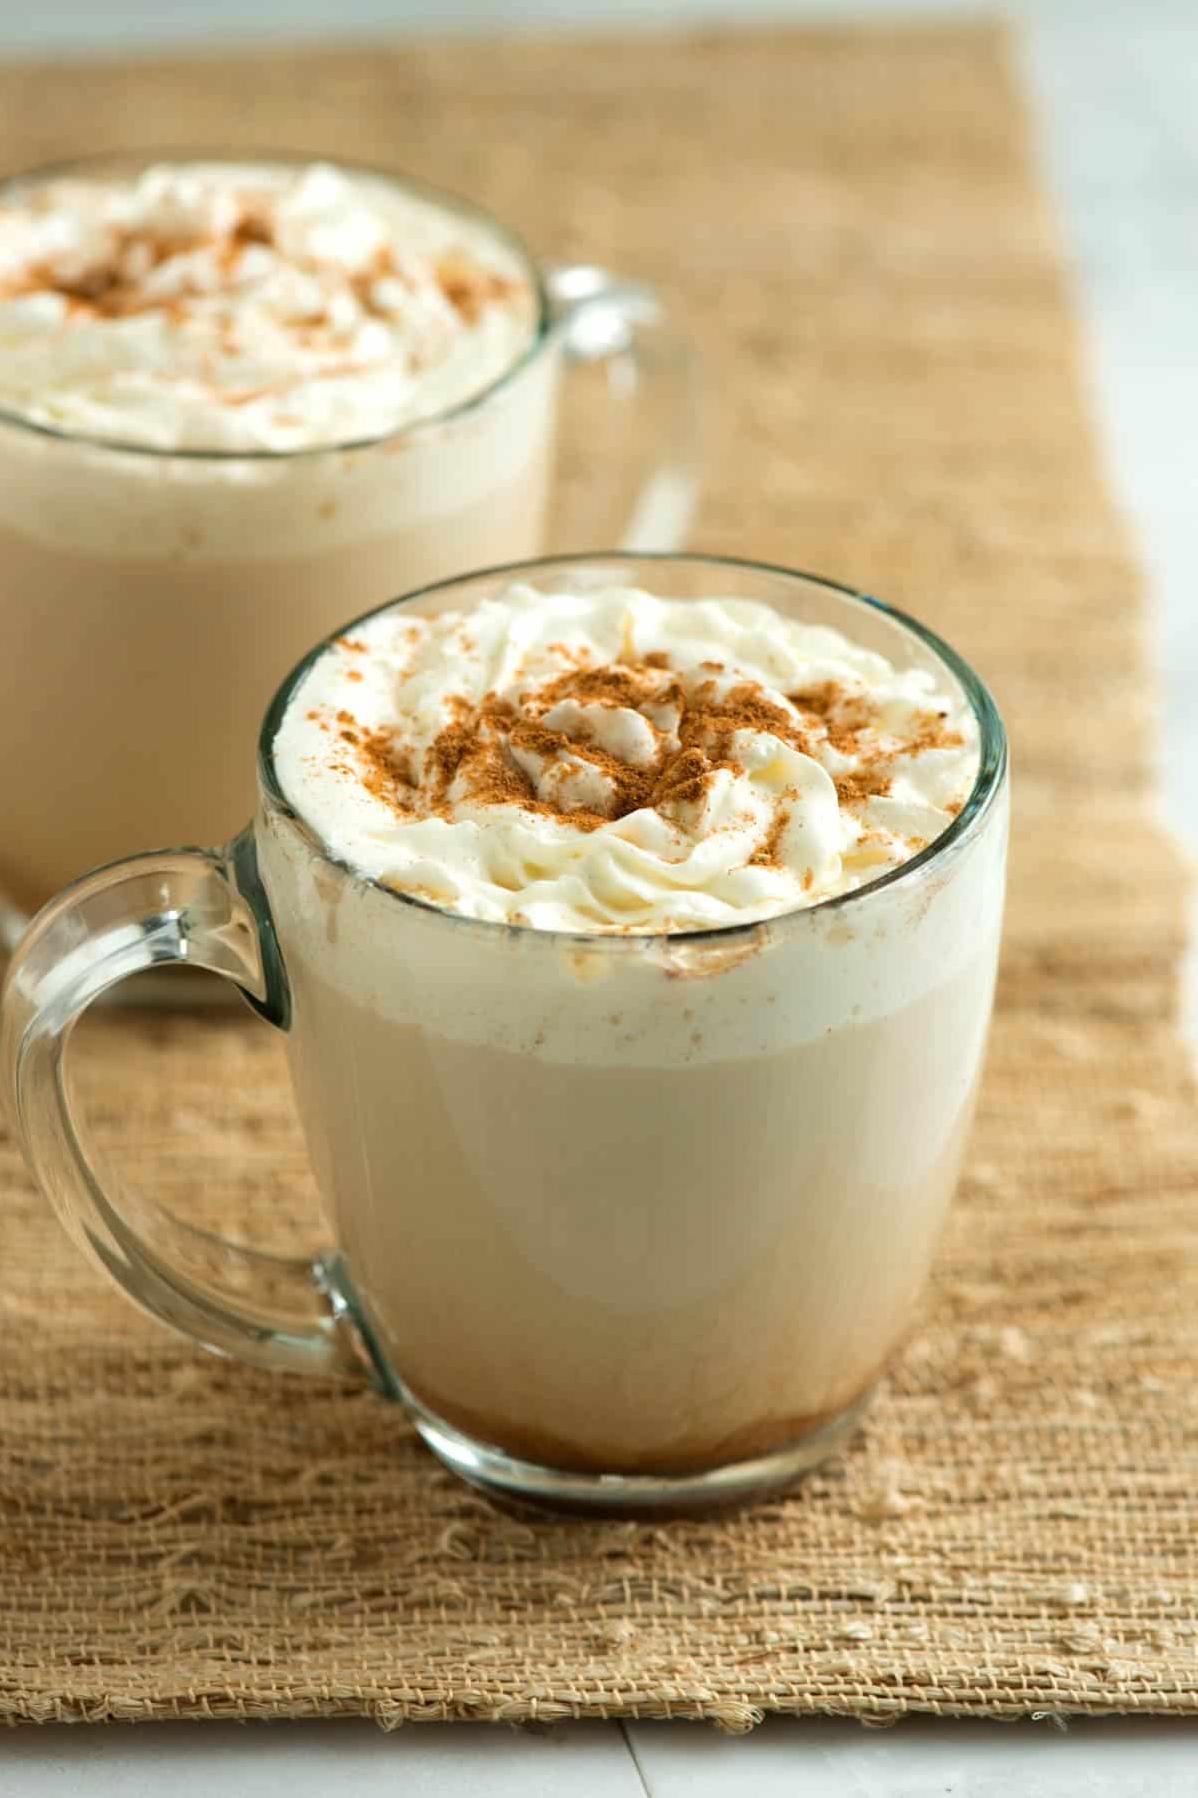  Fall in love with the flavors of the season with our Pumpkin Spice Latte II.